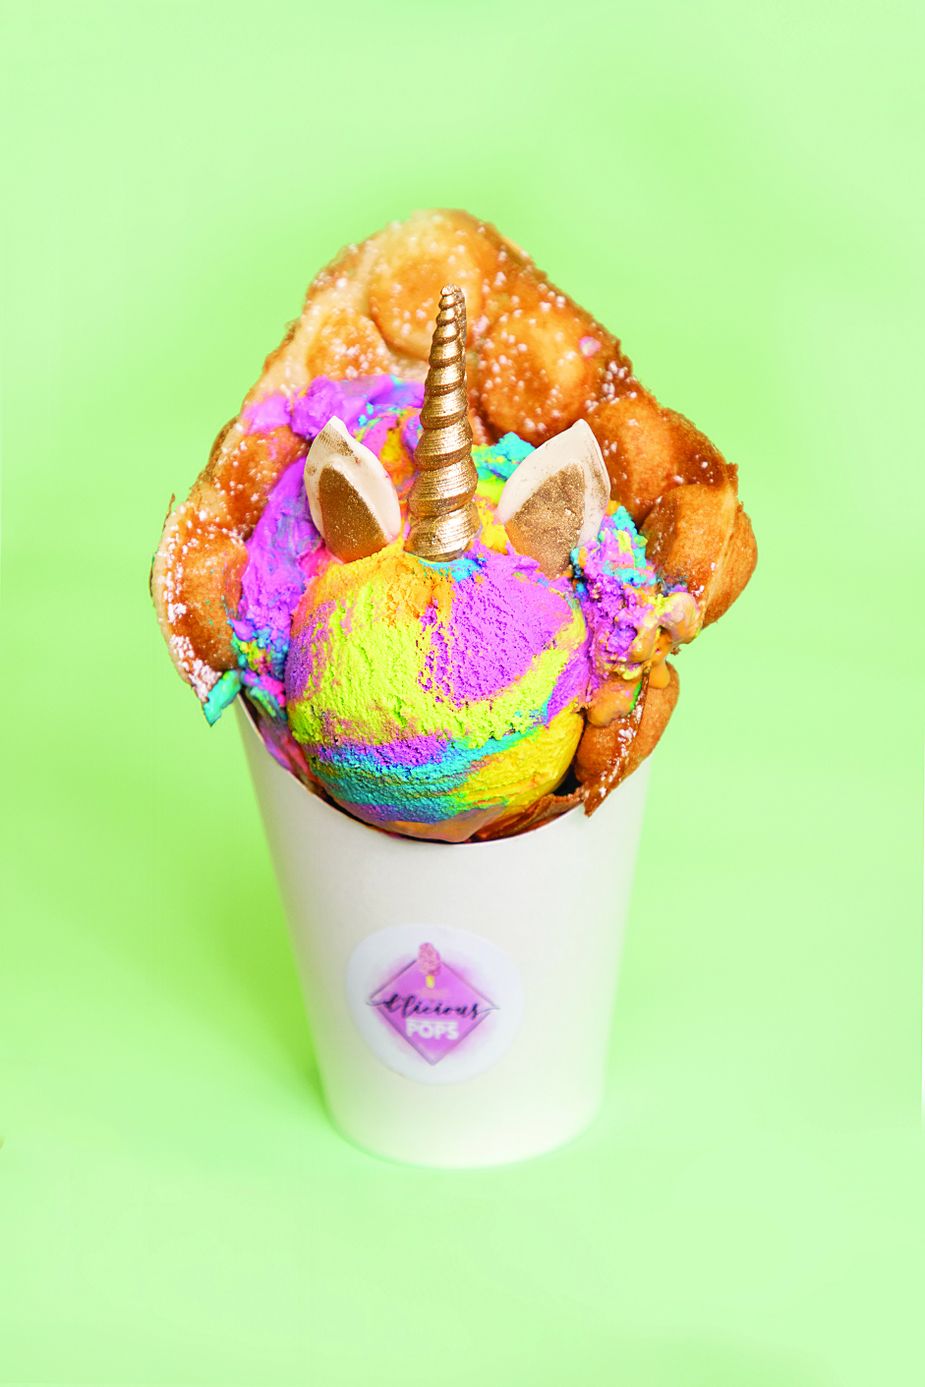 The unicorn bubble waffle treat is one of many beautiful and delectable menu items at D’licious Pops in Woodward. Photo by Lori Duckworth